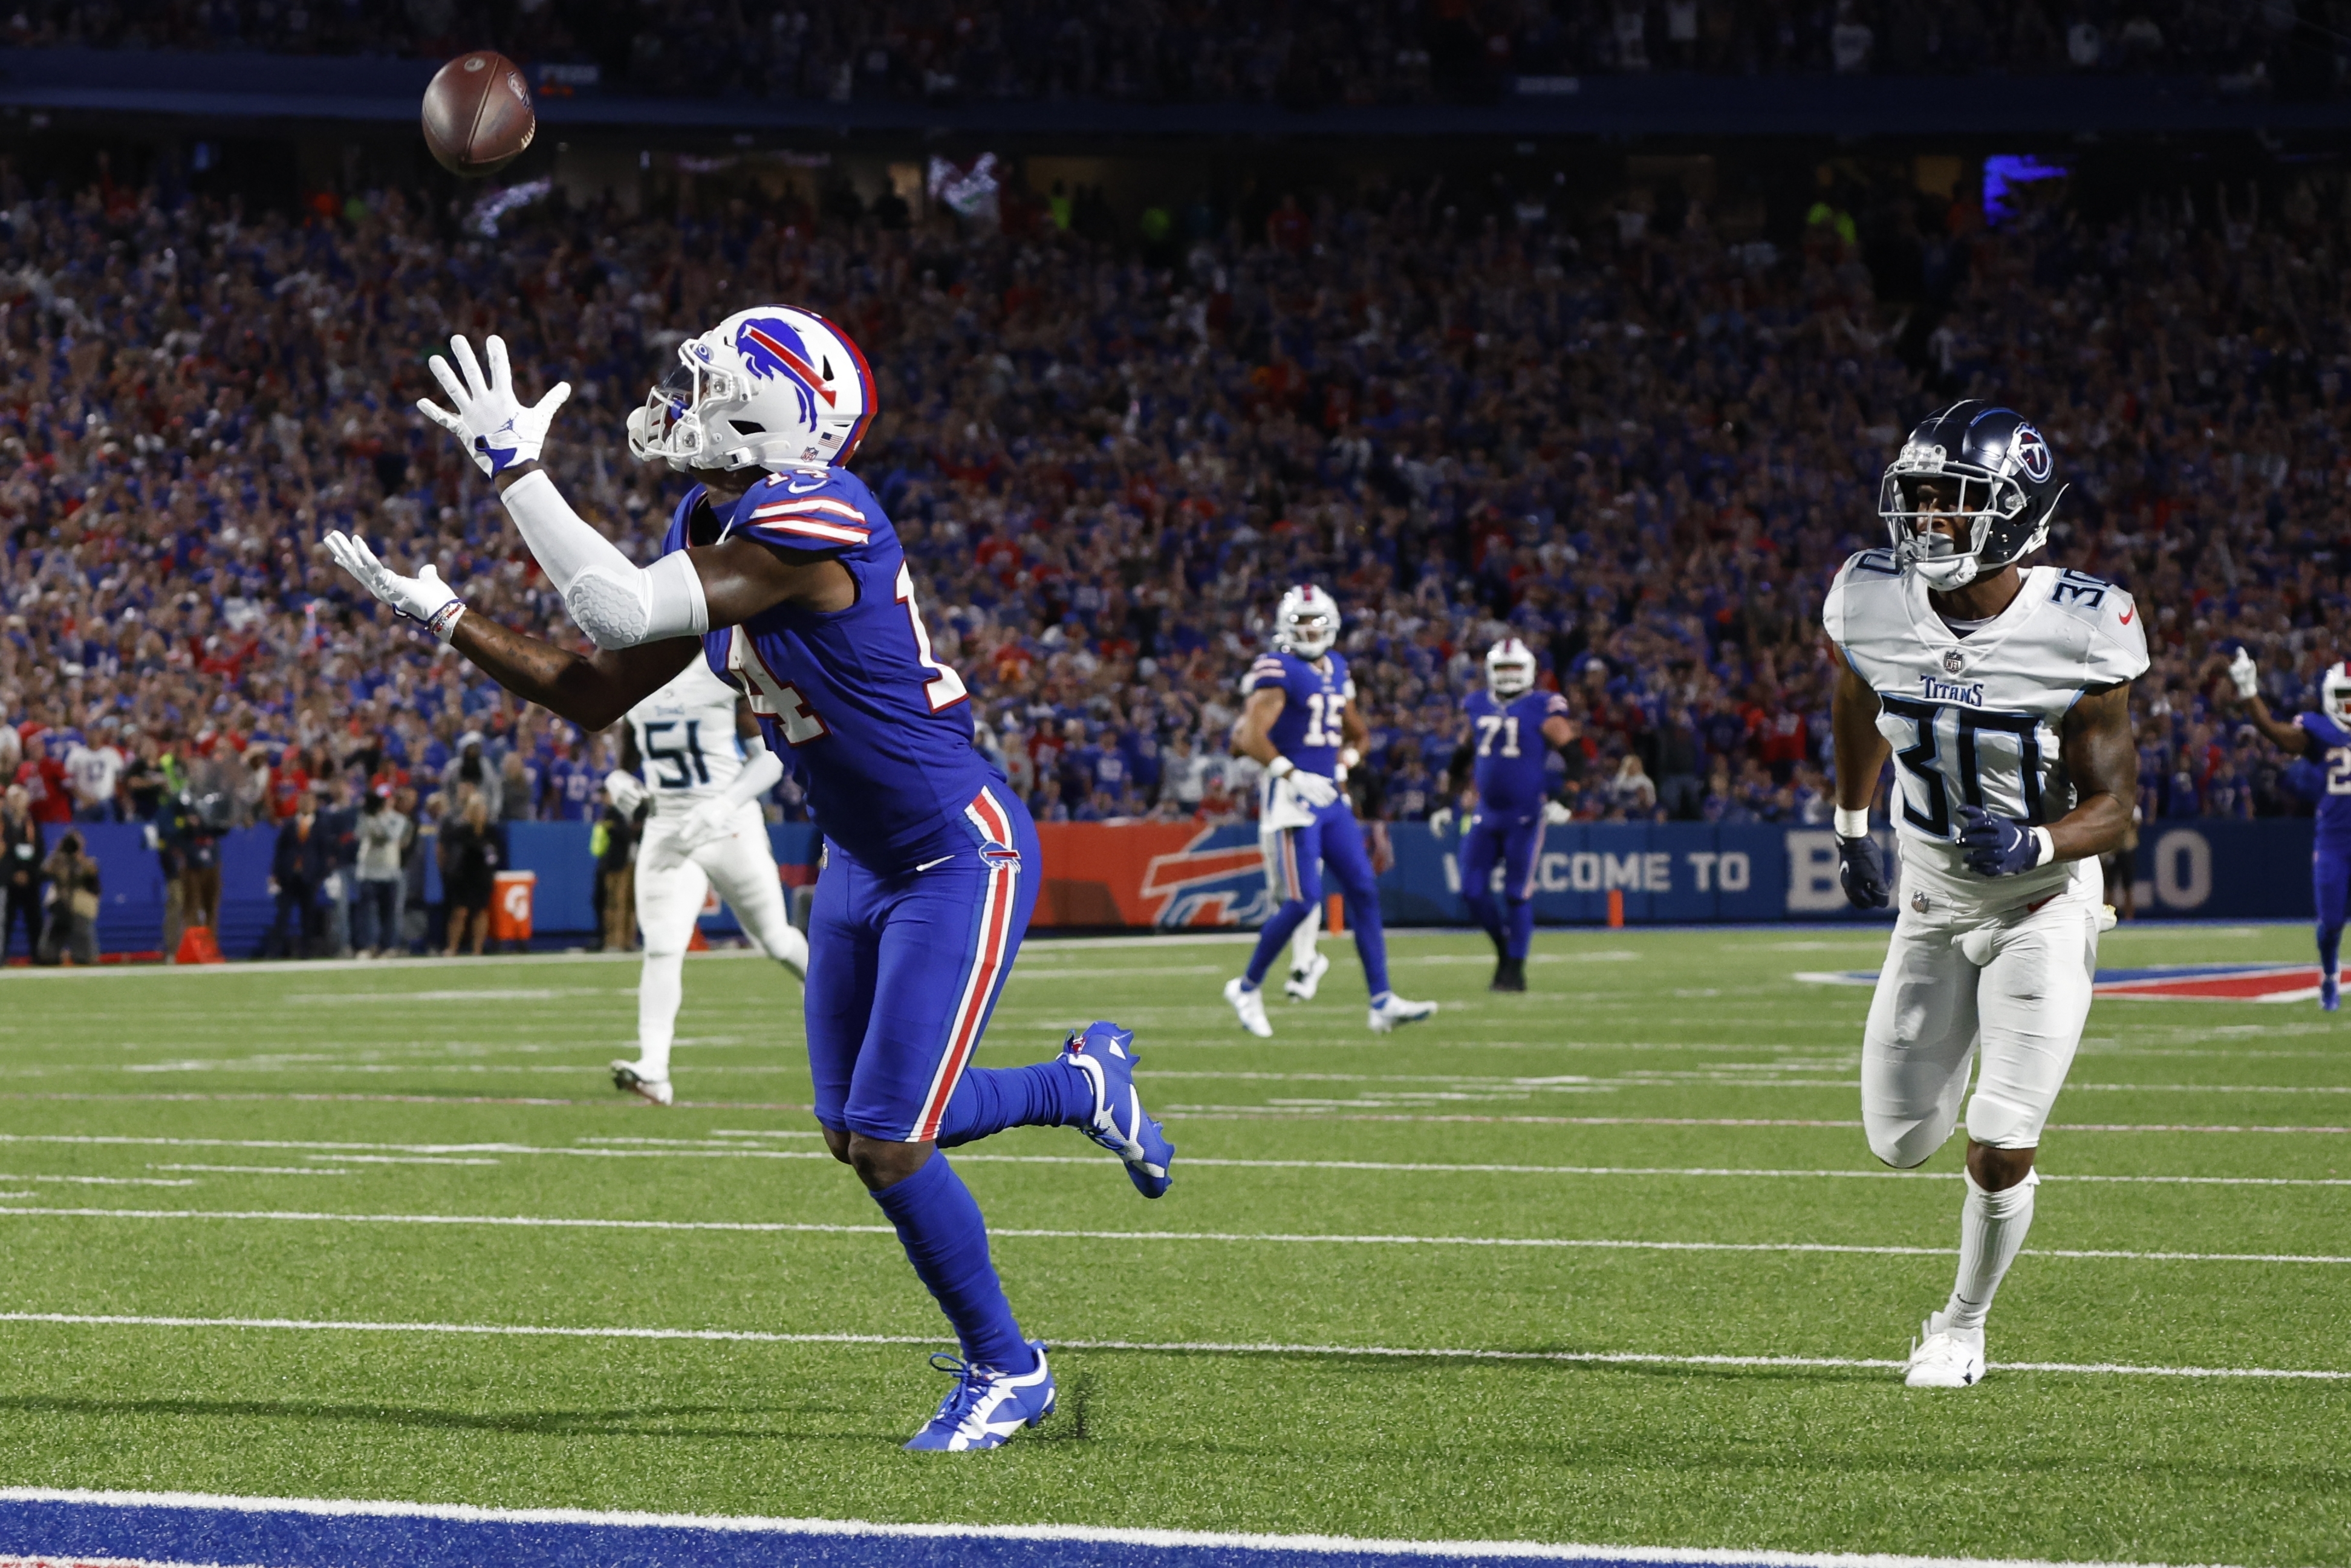 Hat-trick TD! Stefon Diggs' filthy route sparks WR's third score of game, Bills vs. Dolphins